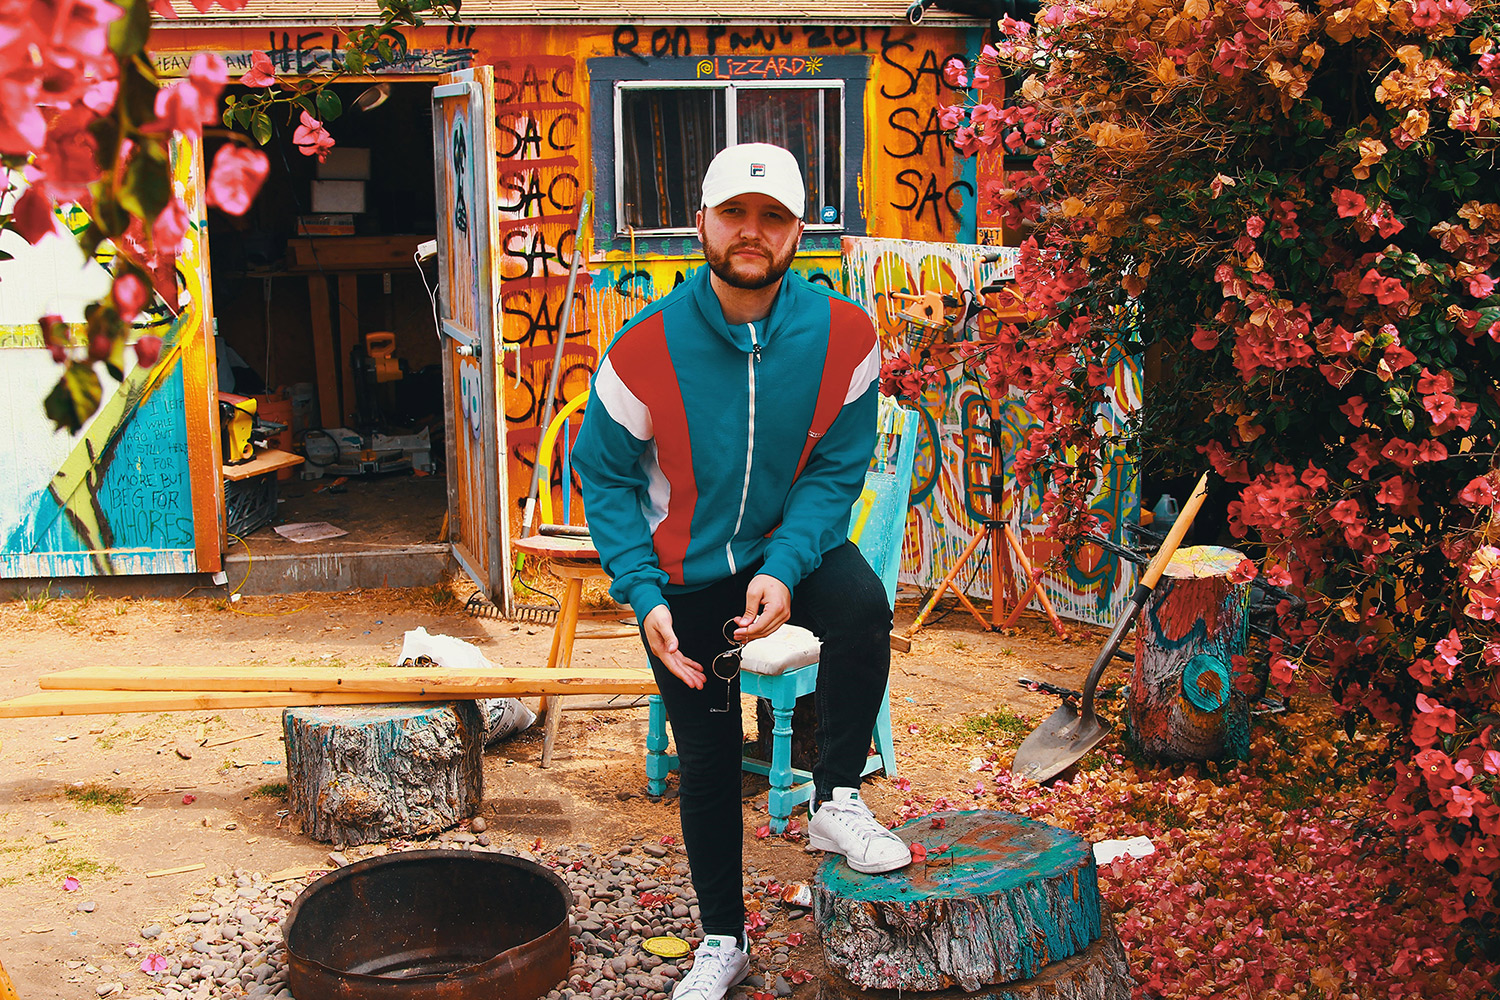 Quinn XCII in front of a colorful building